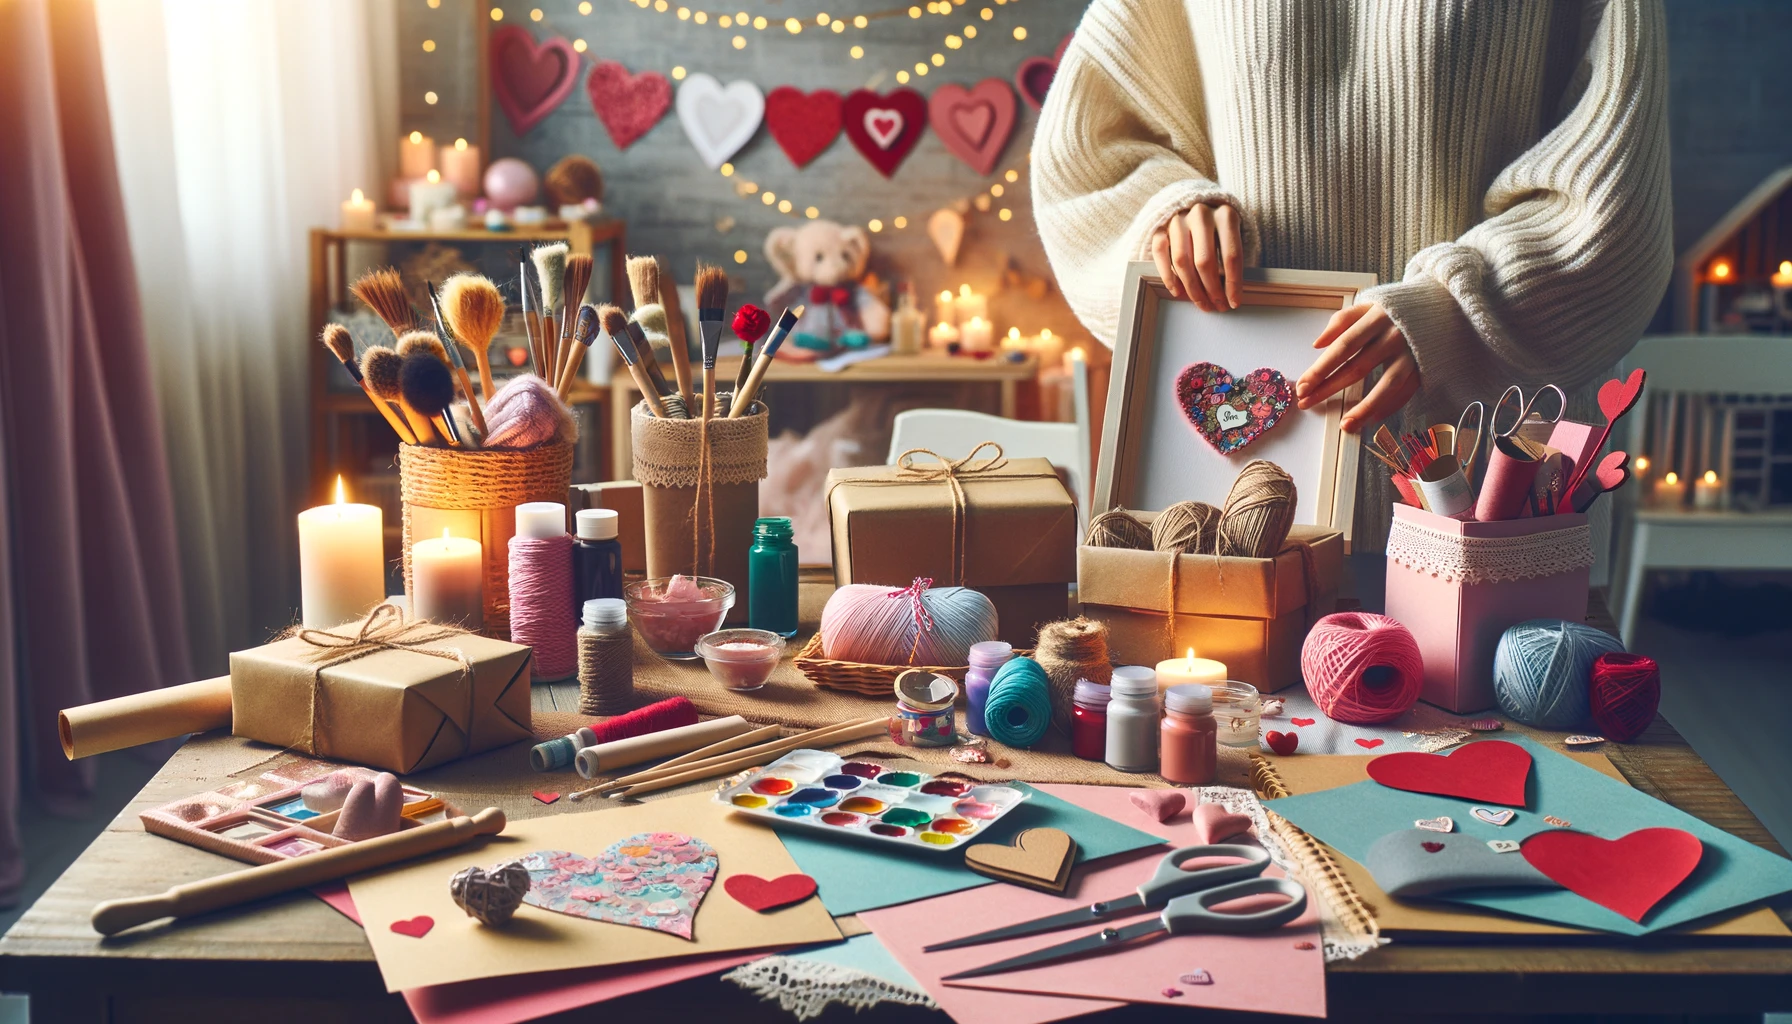 An image depicting a hands-on crafting scene with several DIY Valentine's Day gifts being made